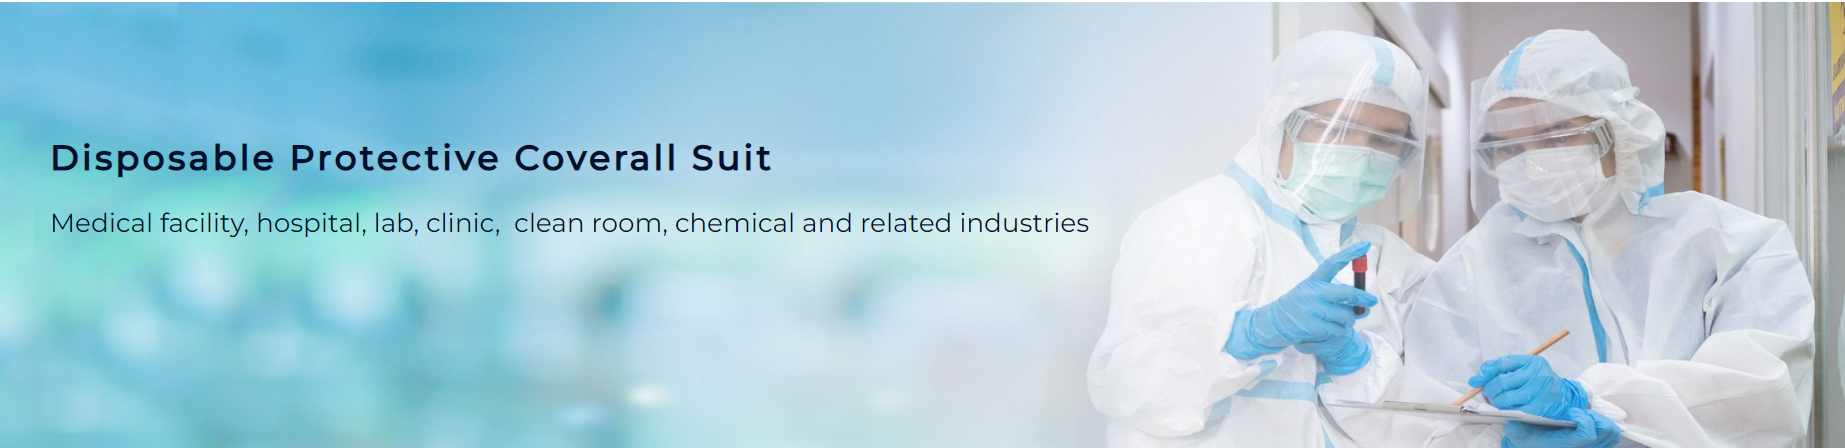 ppe, ppe suit, coverall suit